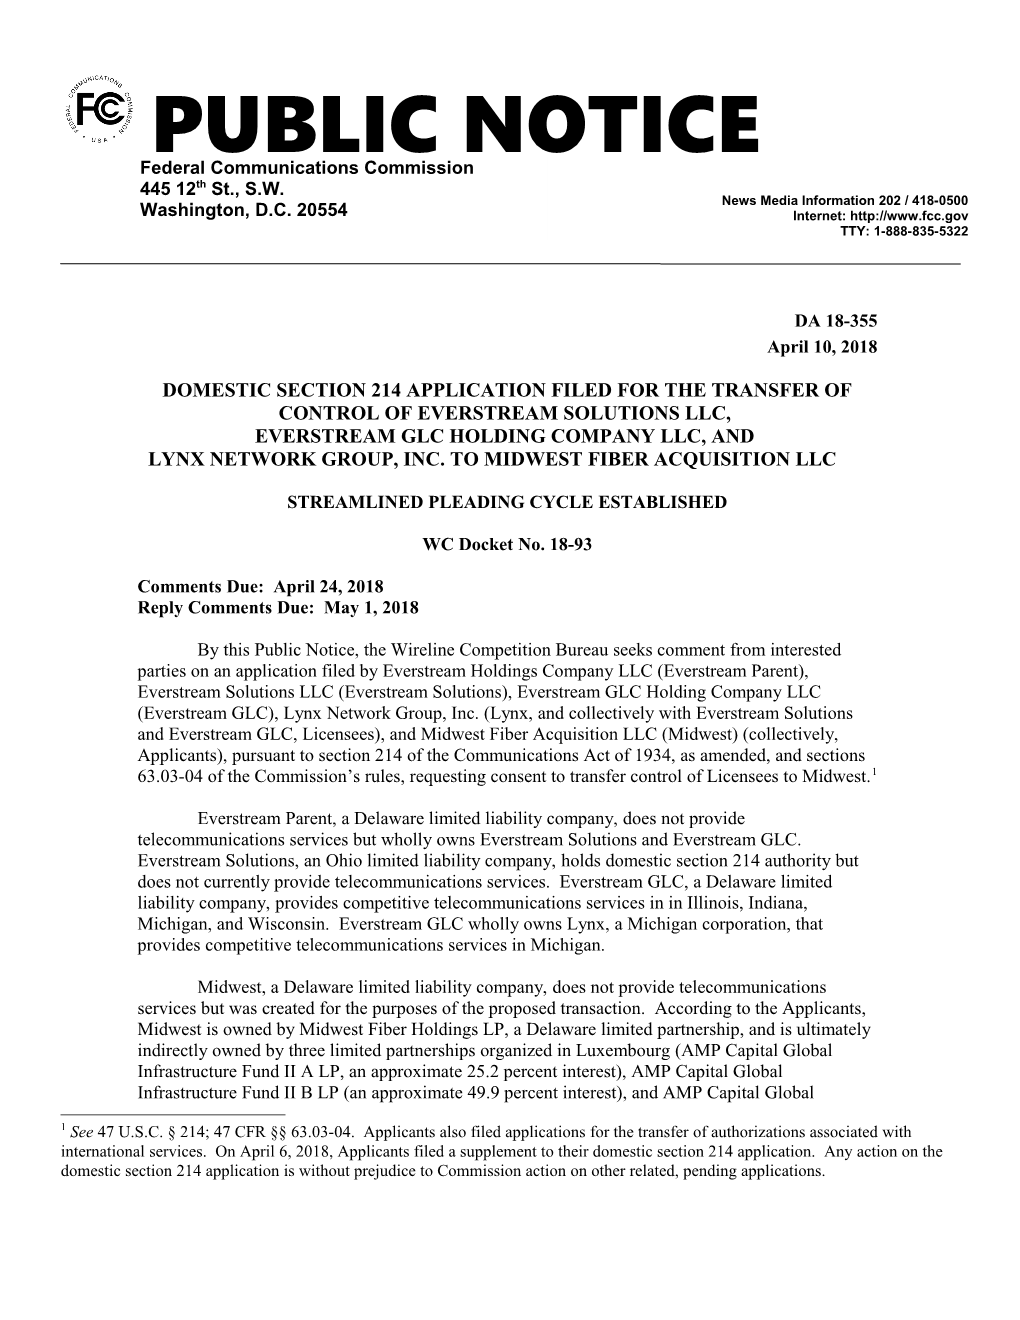 Domestic Section 214 Application Filed for the Transfer of Control of Everstream Solutions